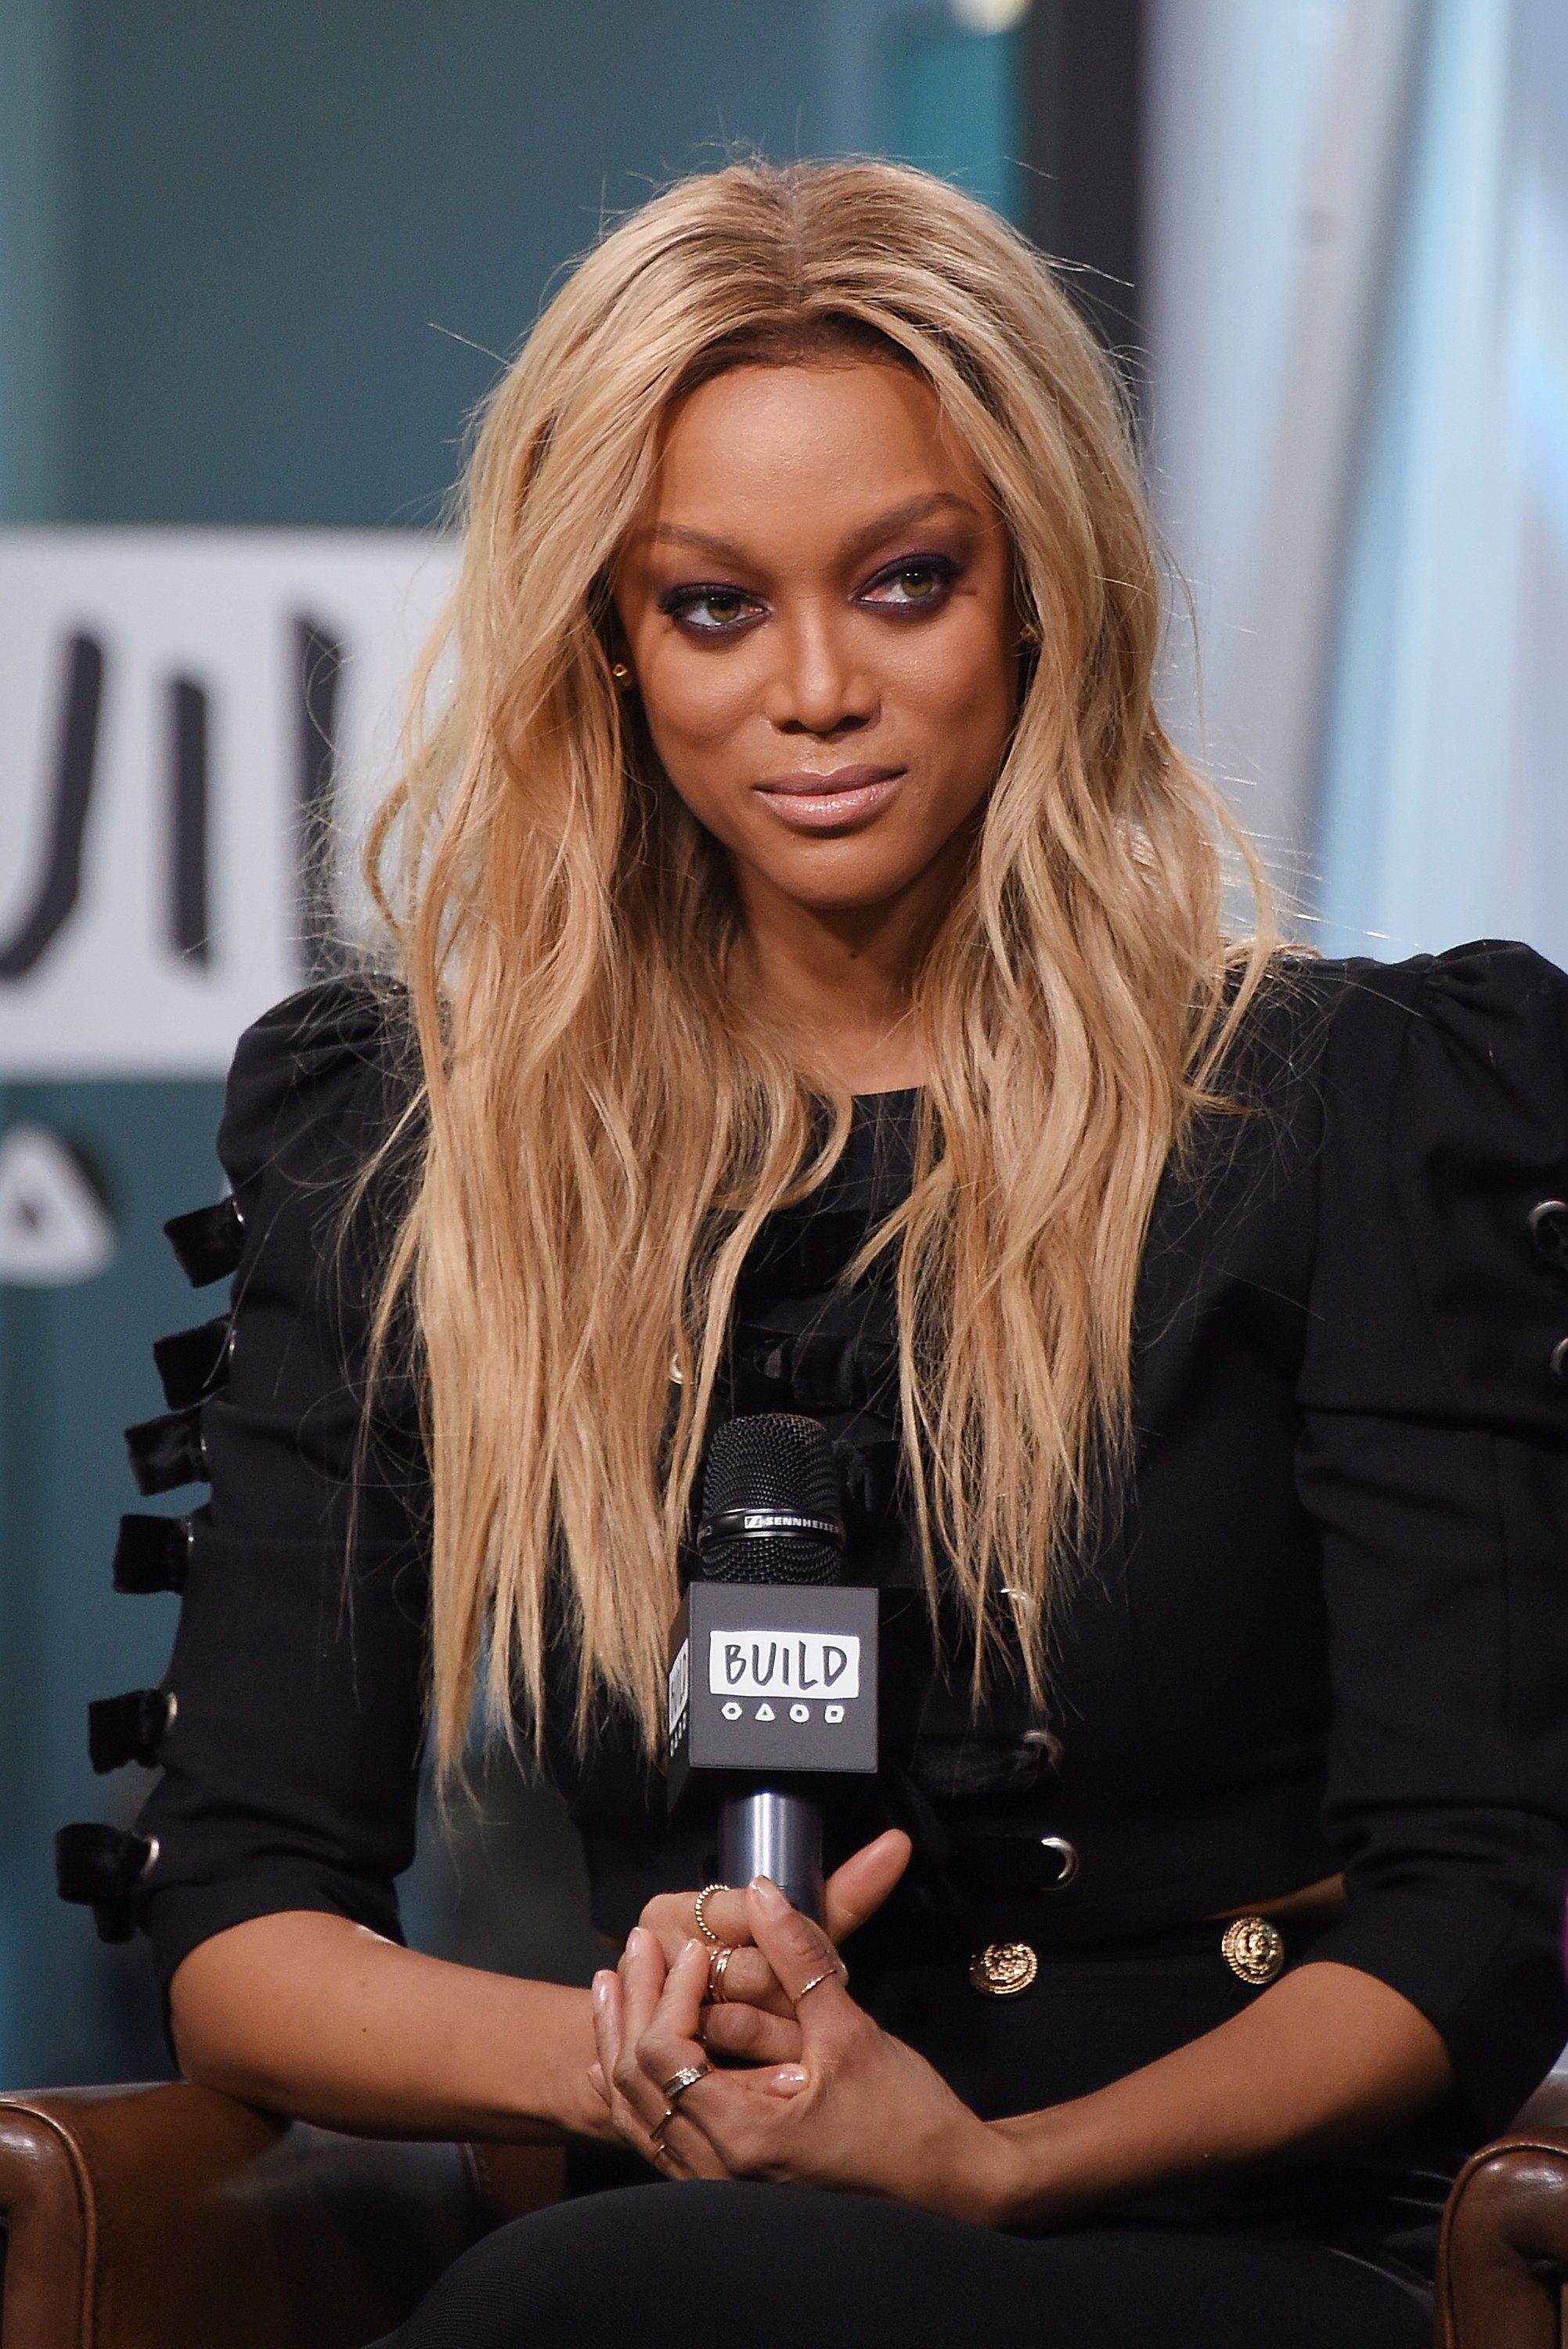 Tyra Banks visits Build Studio to discuss the show "America's Next Top Model" at Build Studio on January 9, 2018 in New York City | Photo: GettyImages